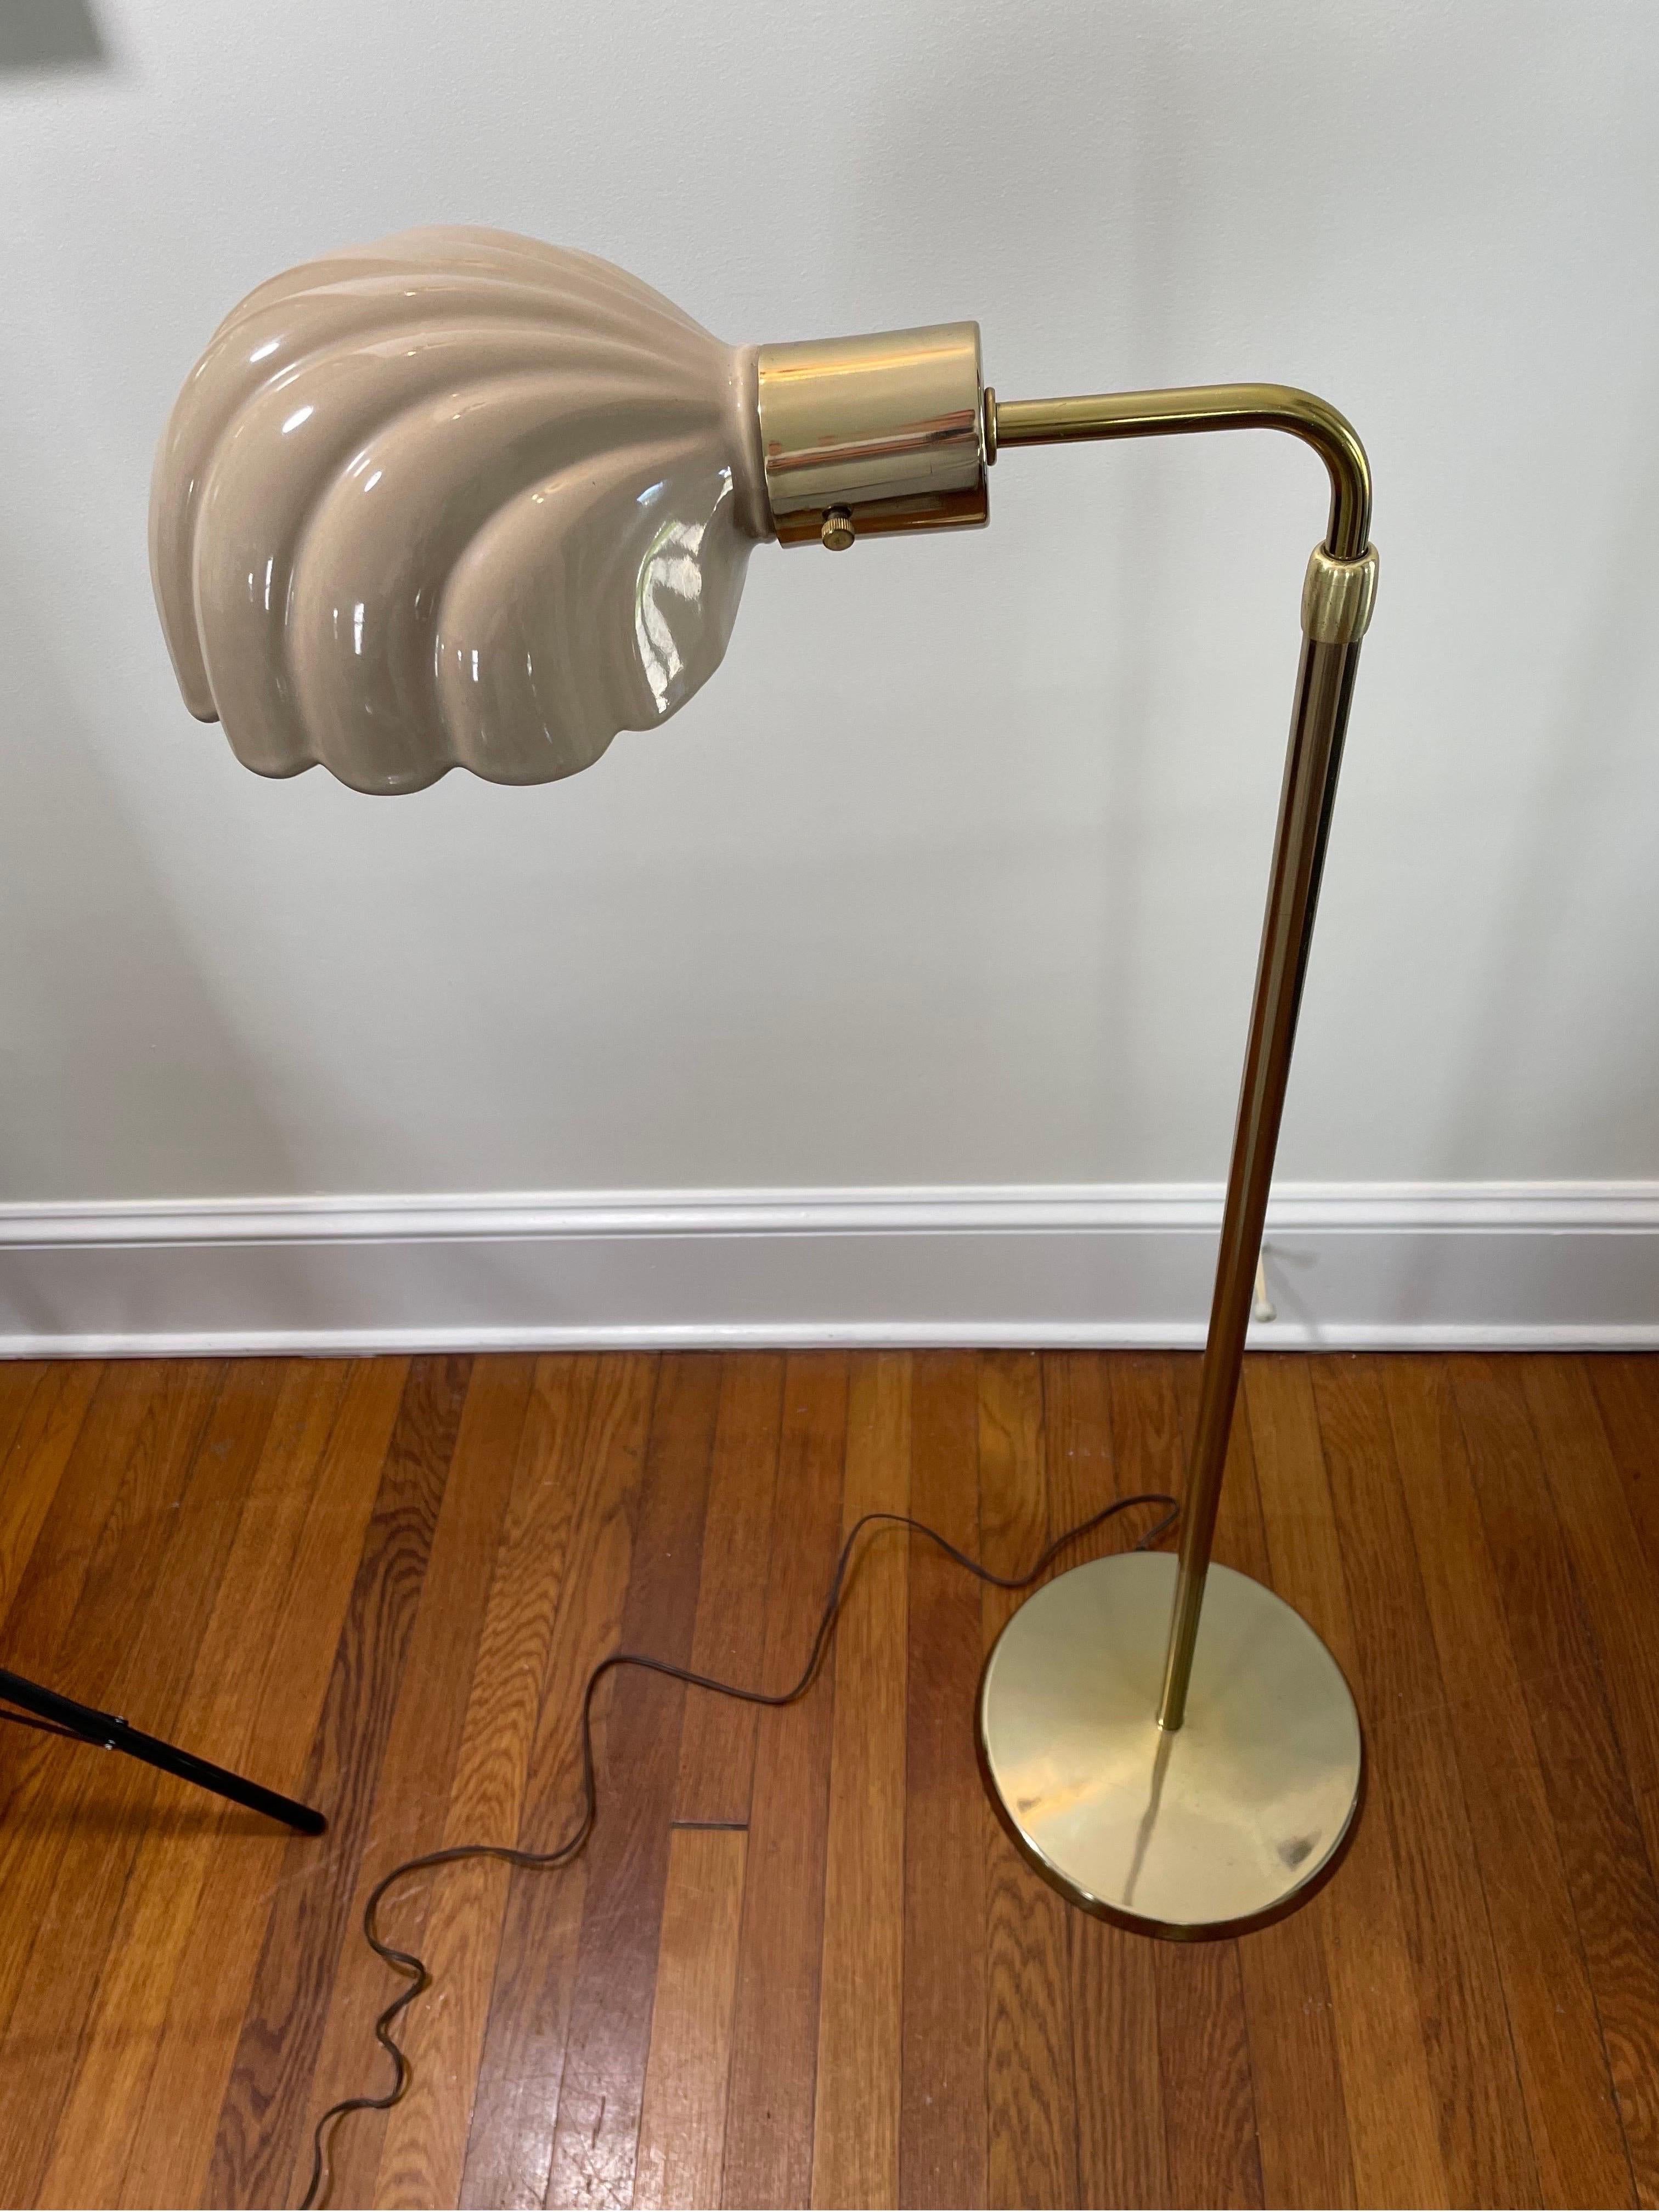 circa 1960s Italian reading lamp.
Pivoting ceramic scallop shell shade on adjustable height base.
All original and in perfect working order.

Adjusts from 36